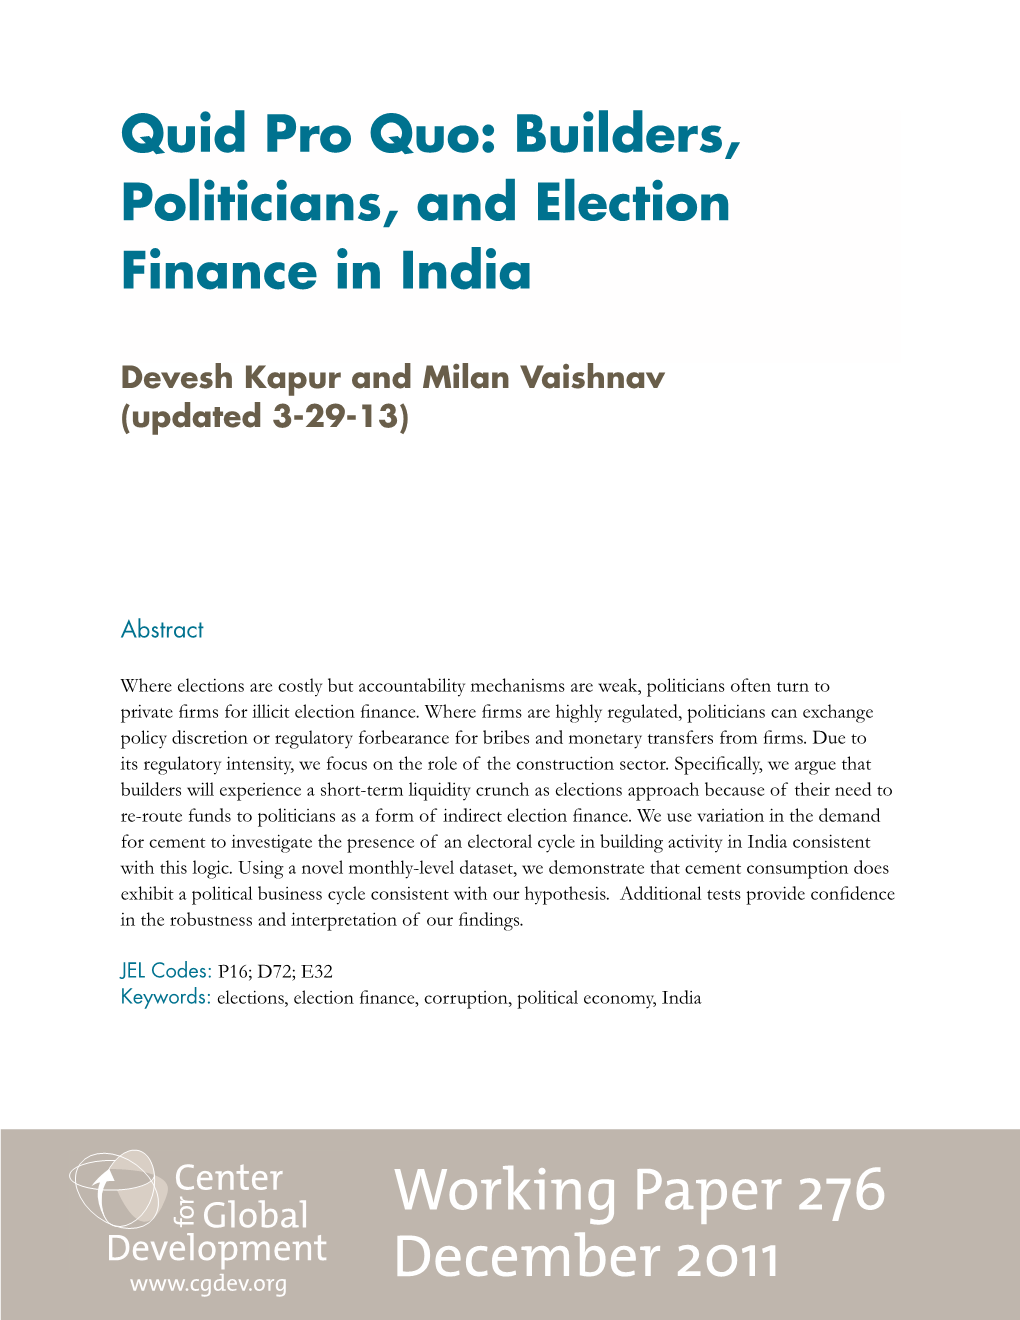 Builders, Politicians, and Election Finance in India